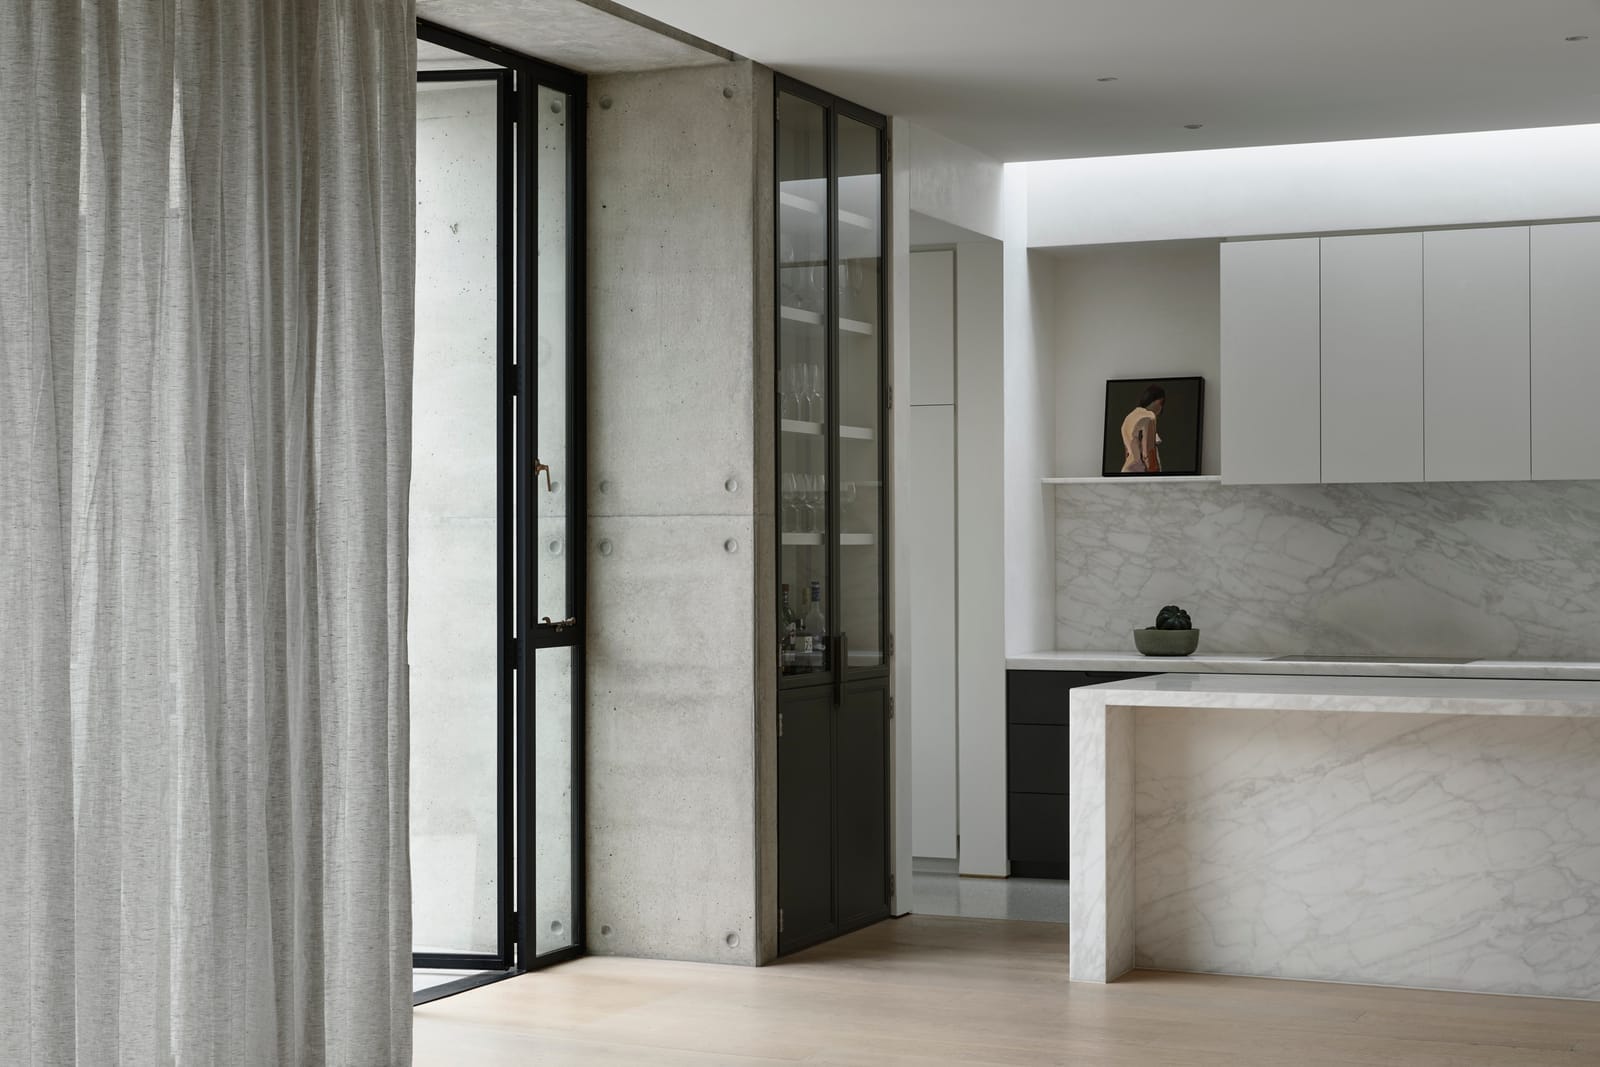 RE Residence by Inglis Architects.partial view of a living room leading to a kitchen. Sheer curtains frame sliding glass doors that reveal the edge of a kitchen island with a marble countertop. A small sculpture is placed on a shelf, and white cabinetry is visible in the background.